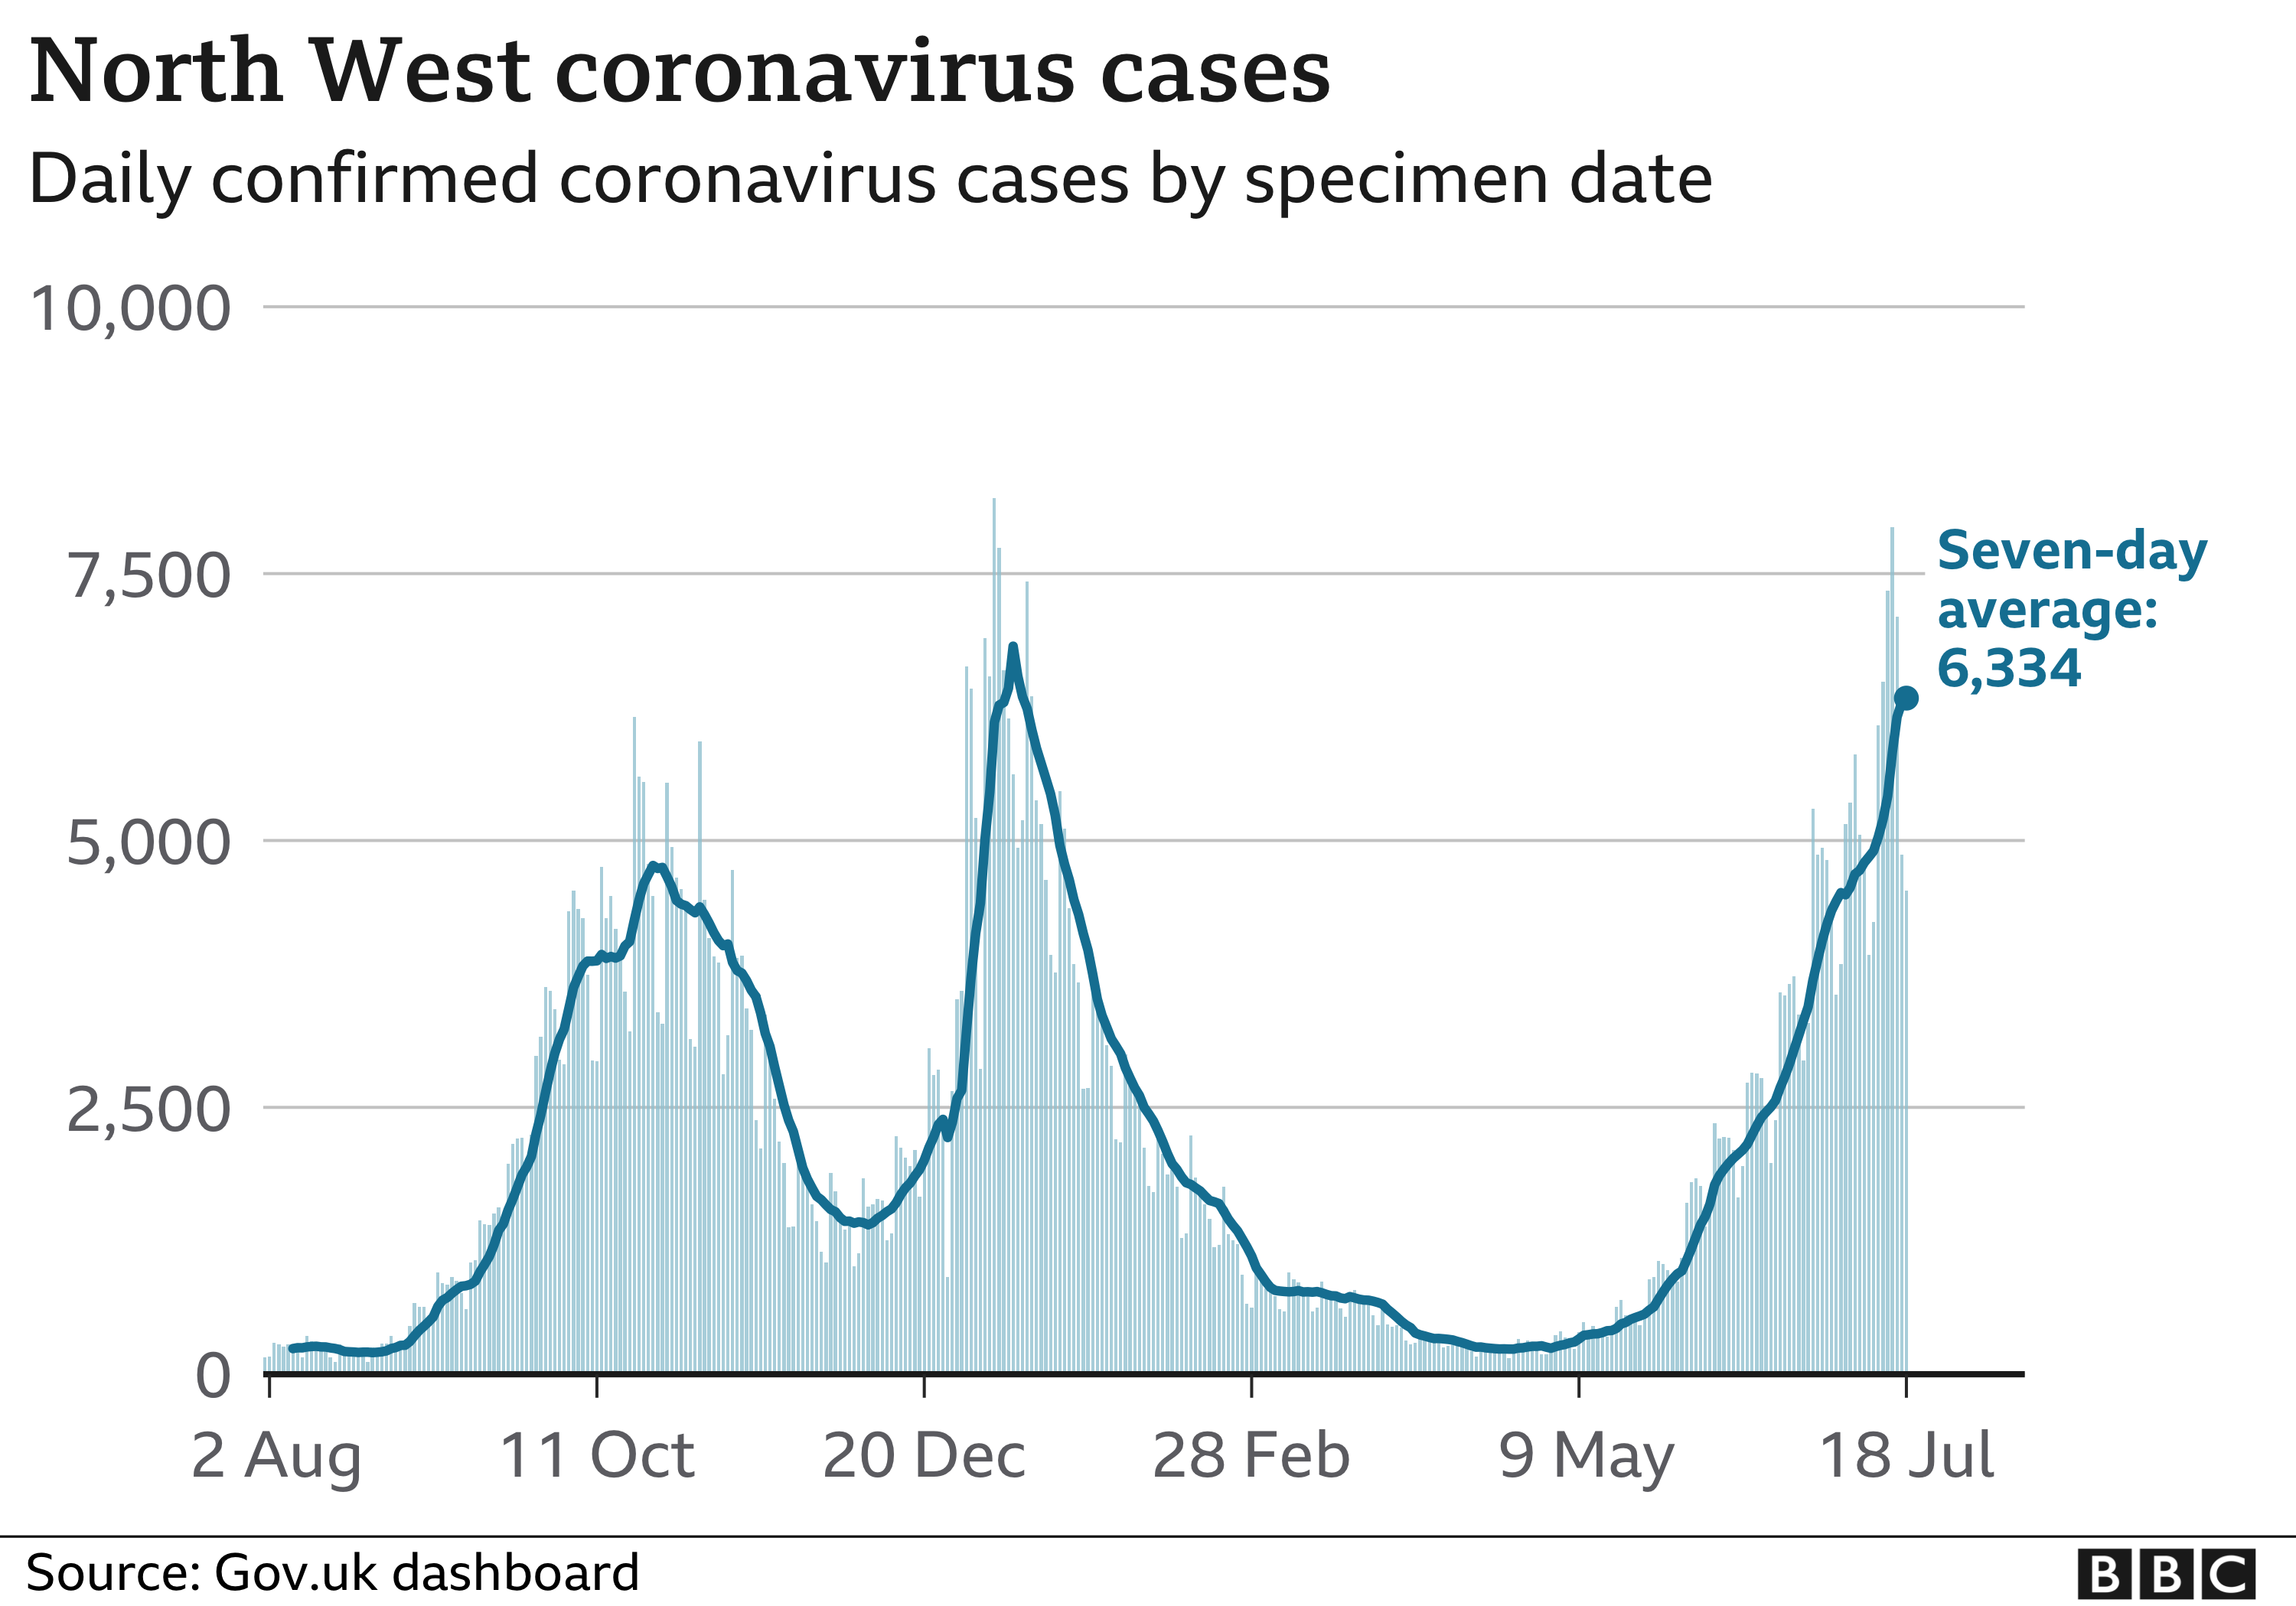 North West Covid-19 cases